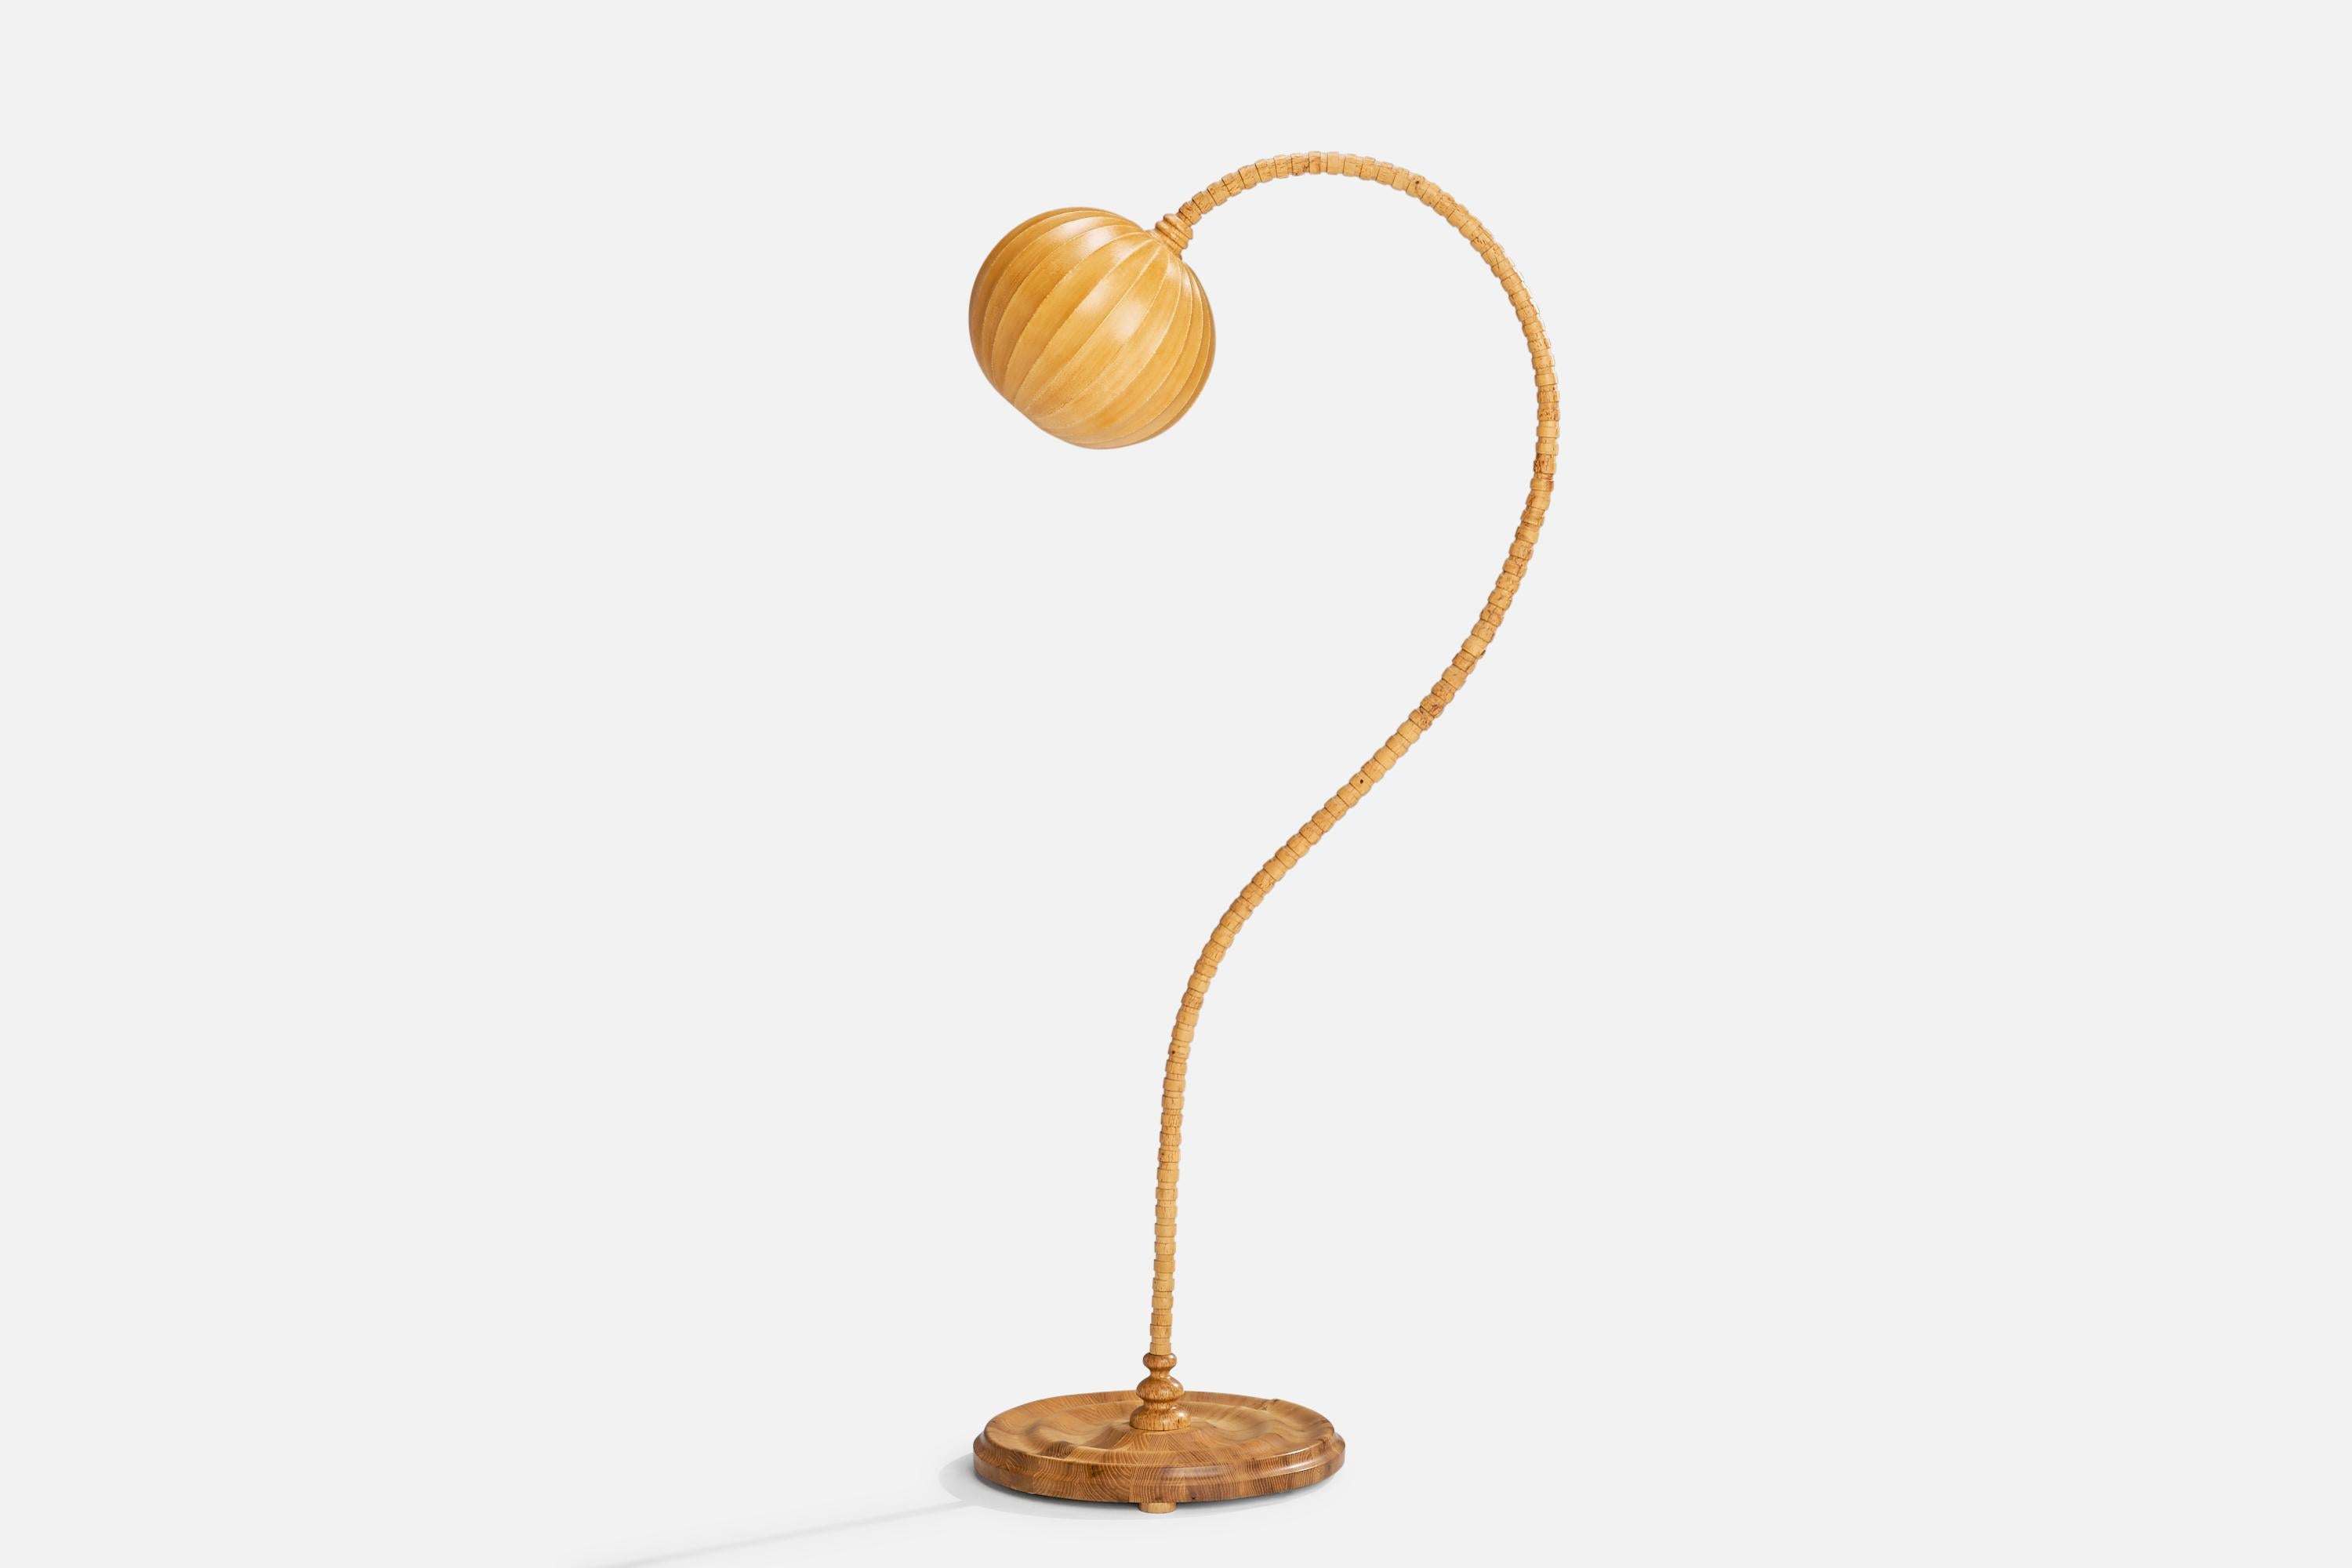 A masur birch, pine and waxed cotton floor lamp designed and produced in Sweden, c. 1960s.

Overall Dimensions (inches): 61.5”  H x 11.5”  W x 26” D
Stated dimensions include shade.
Bulb Specifications: E-26 Bulb
Number of Sockets: 1
All lighting